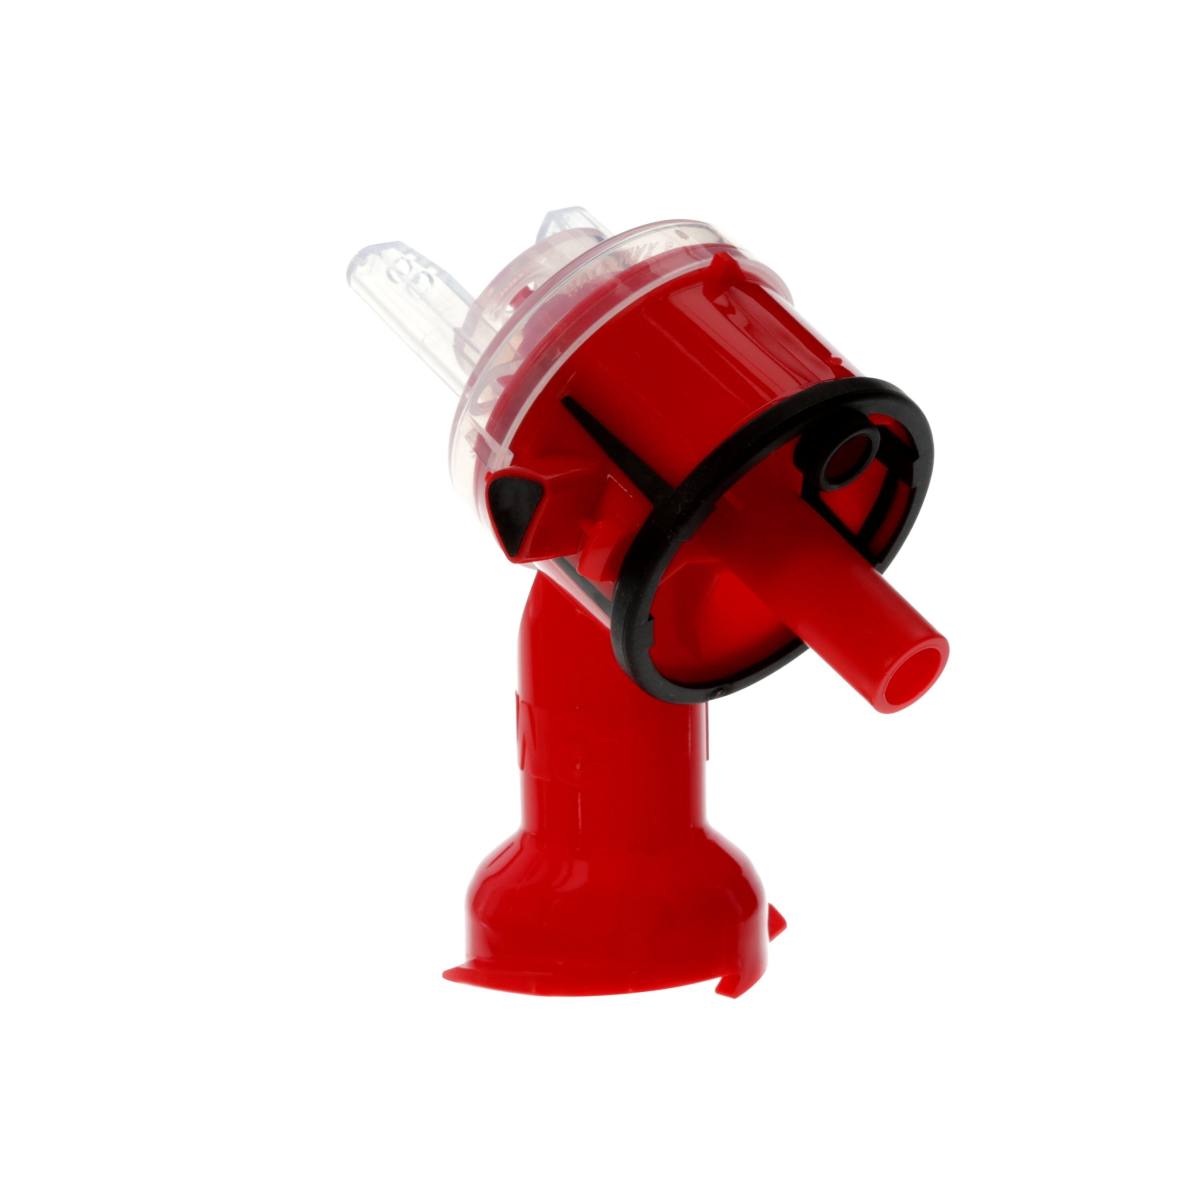 3M Accuspray nozzle head for PPS series 2.0, 2.0 mm, red, 26620 (Pack=4pcs)